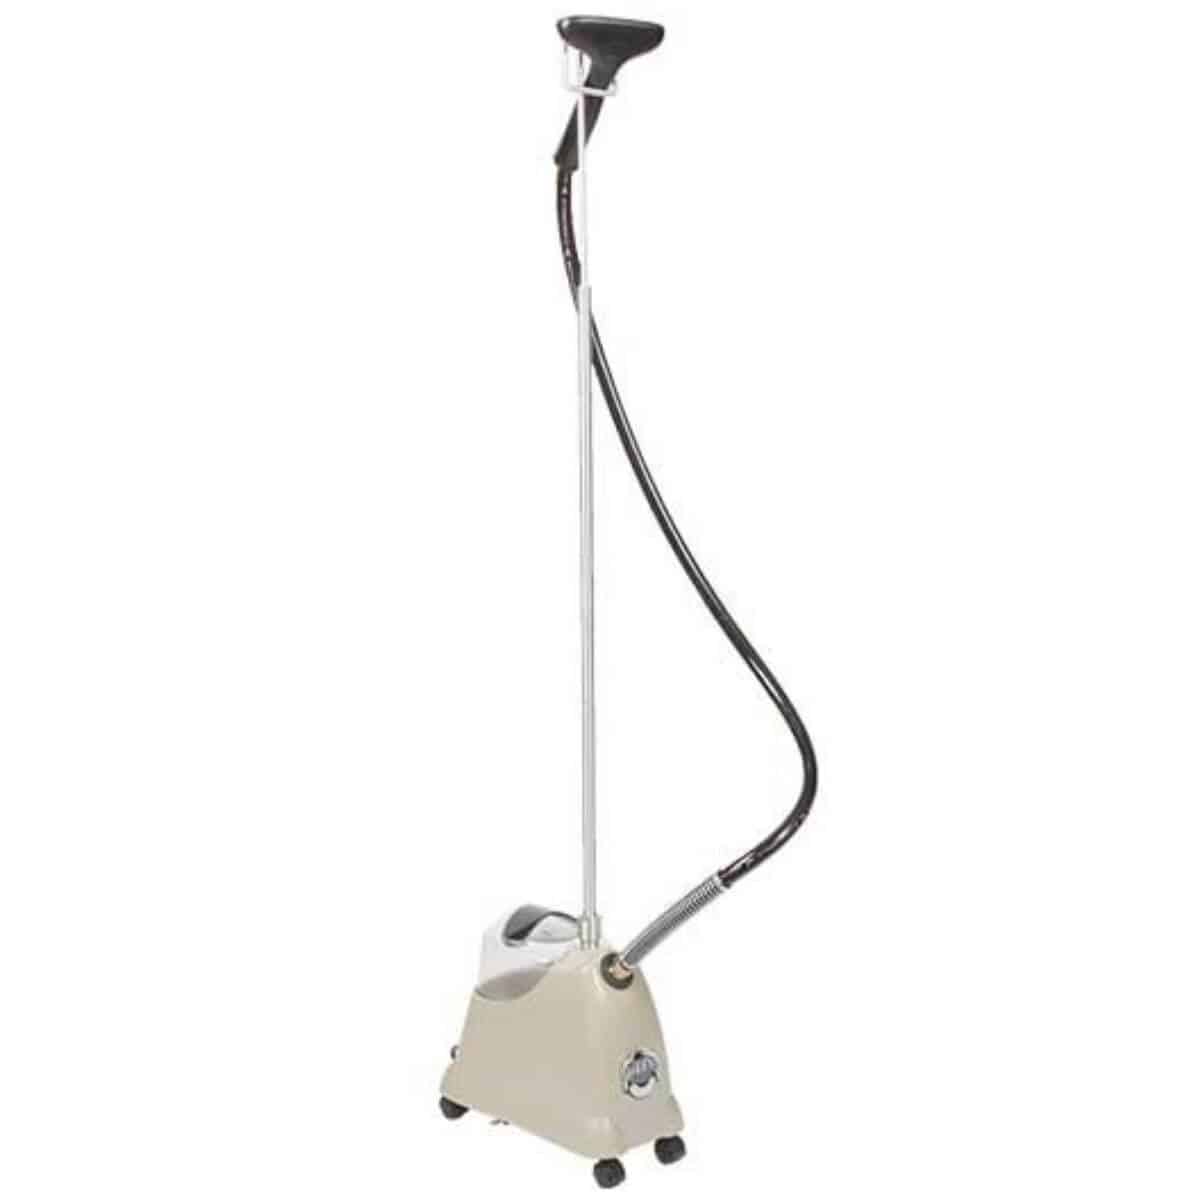 Standing black and grey clothes steamer.